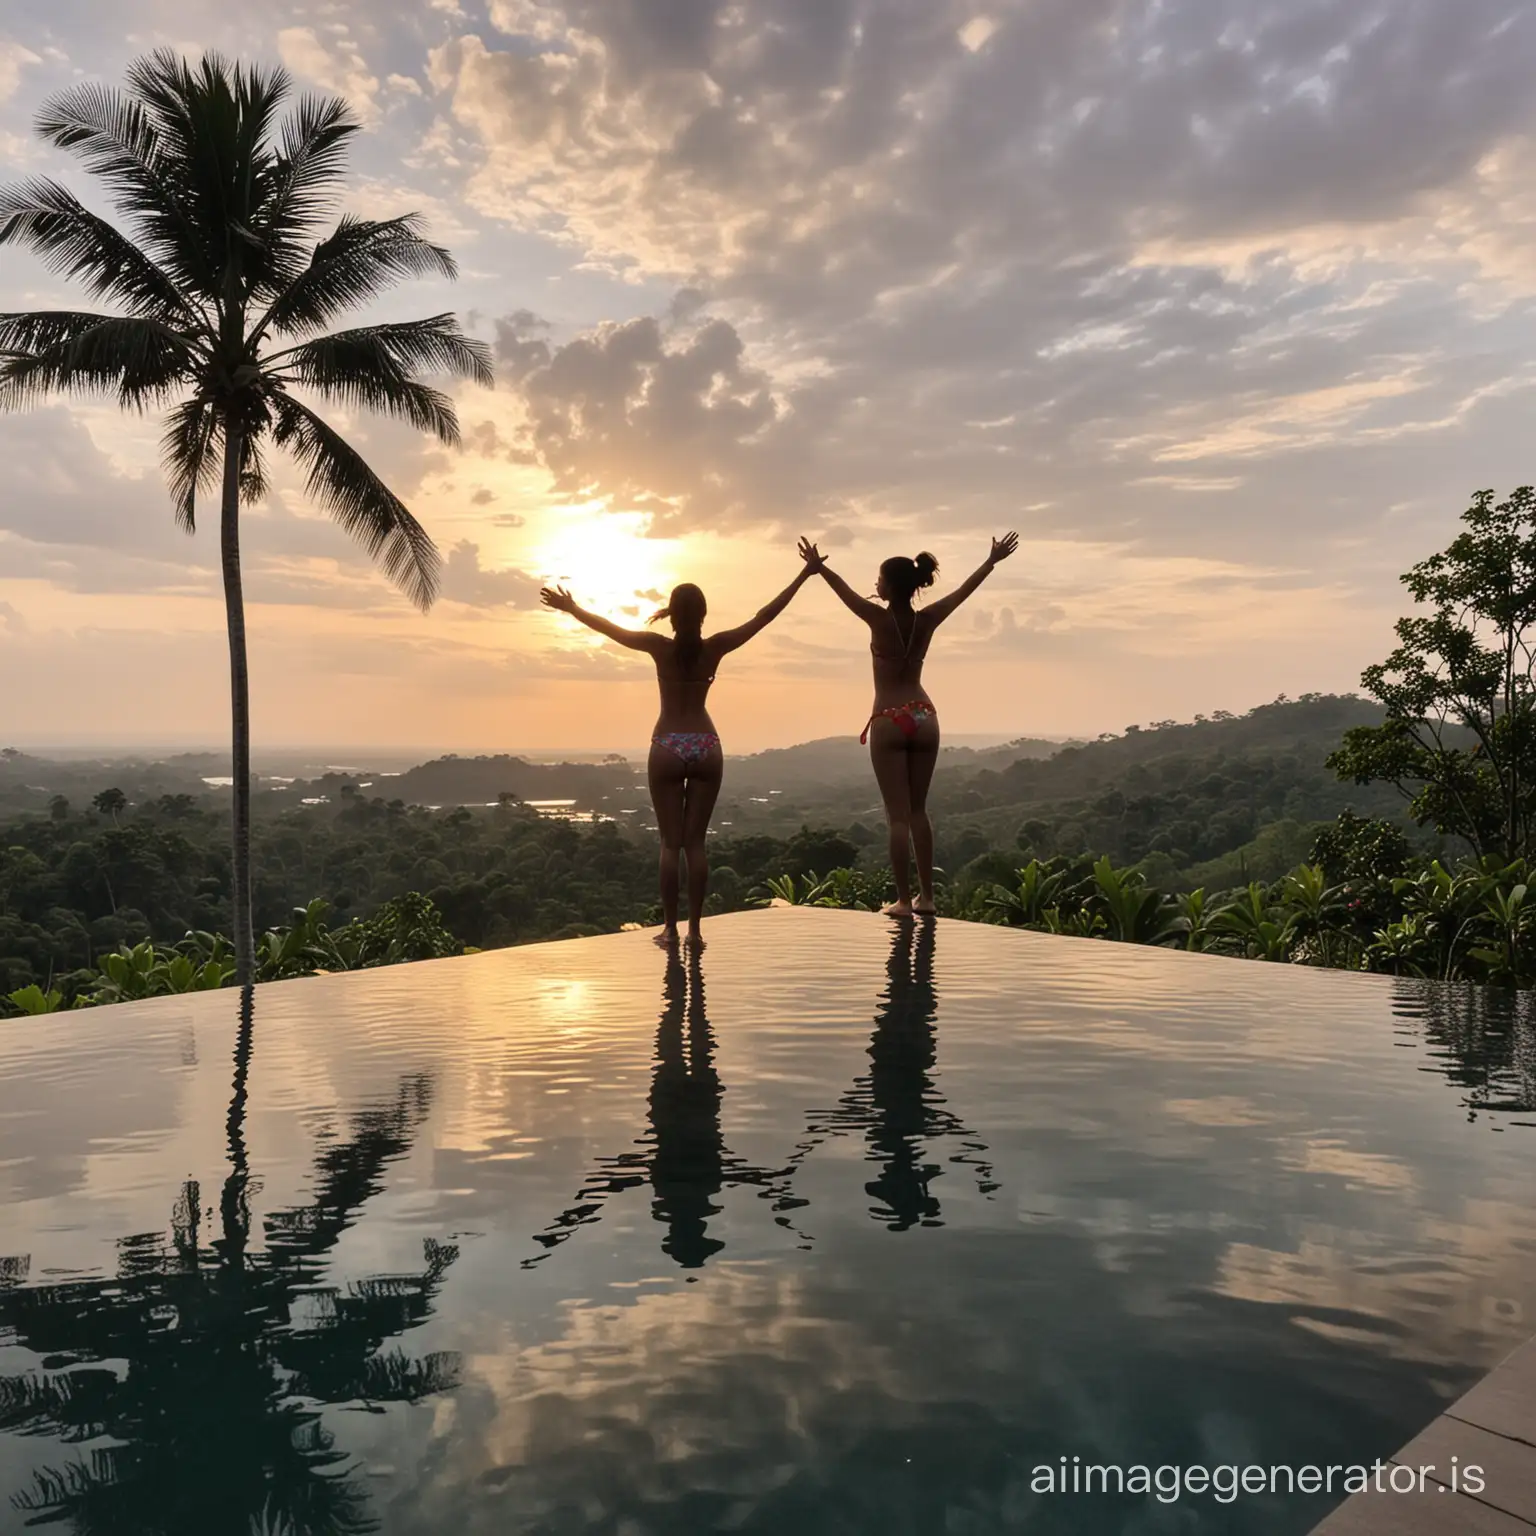 Sri Lankan girls celebrate vacation near up country.
Infinity pool.
Vacation mode.
Age 30 to 35.
Natural beautiful.
Sun set.
Luxury.
Gorgeous.
Lovely